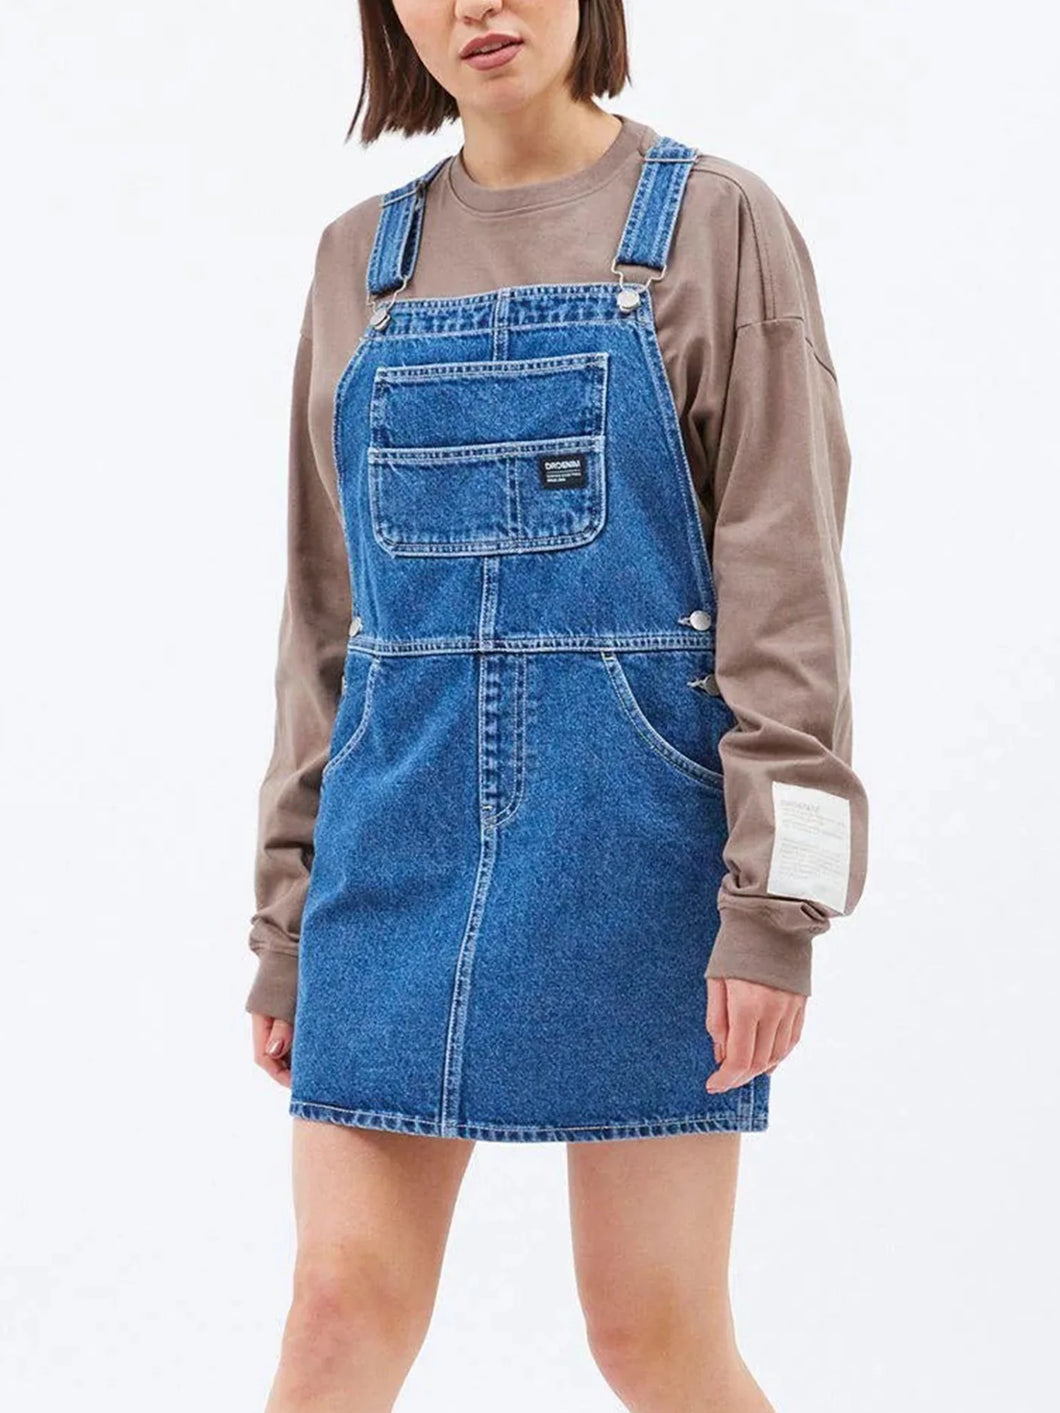 Connie Dungaree Overall Skirt by Dr Denim